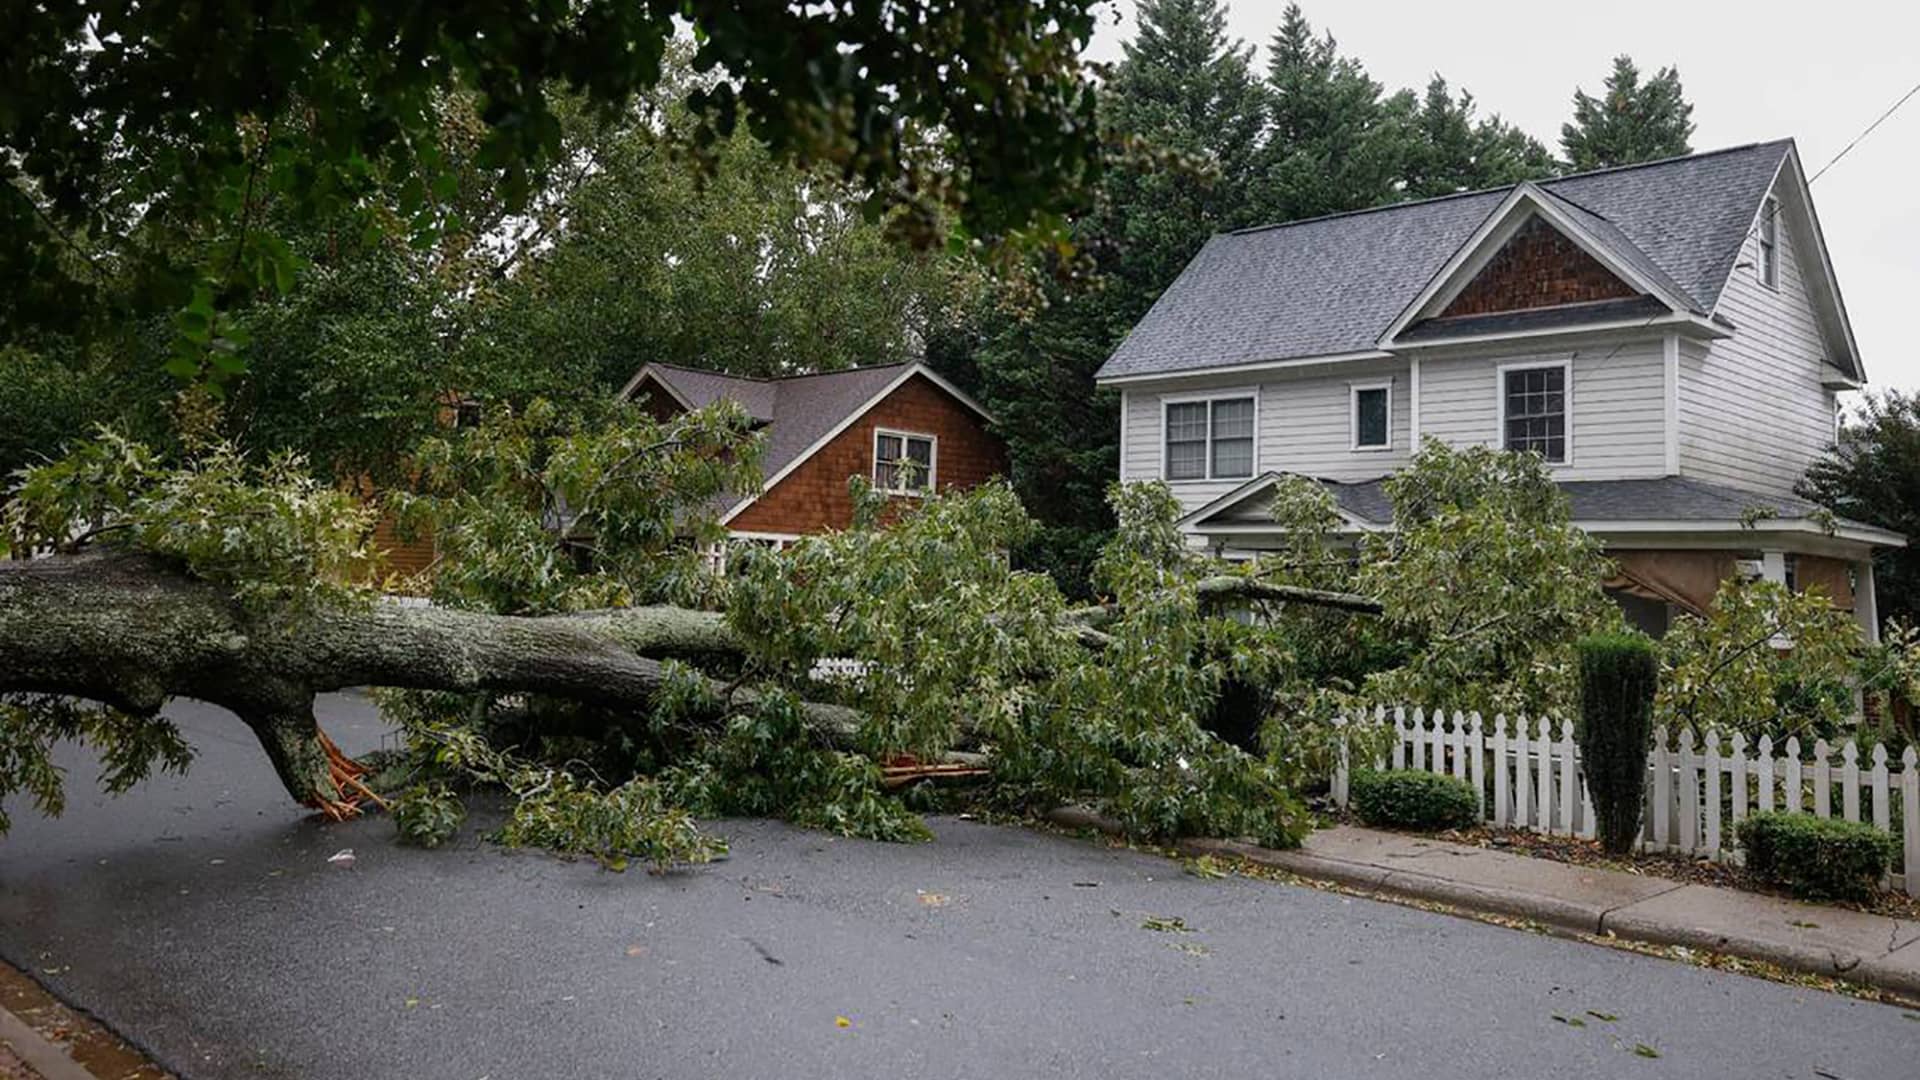 A fallen tree blocks Holt Street as Hurricane Ian and its remnants begins to arrive in Charlotte, North Carolina, on Sept. 30, 2022.